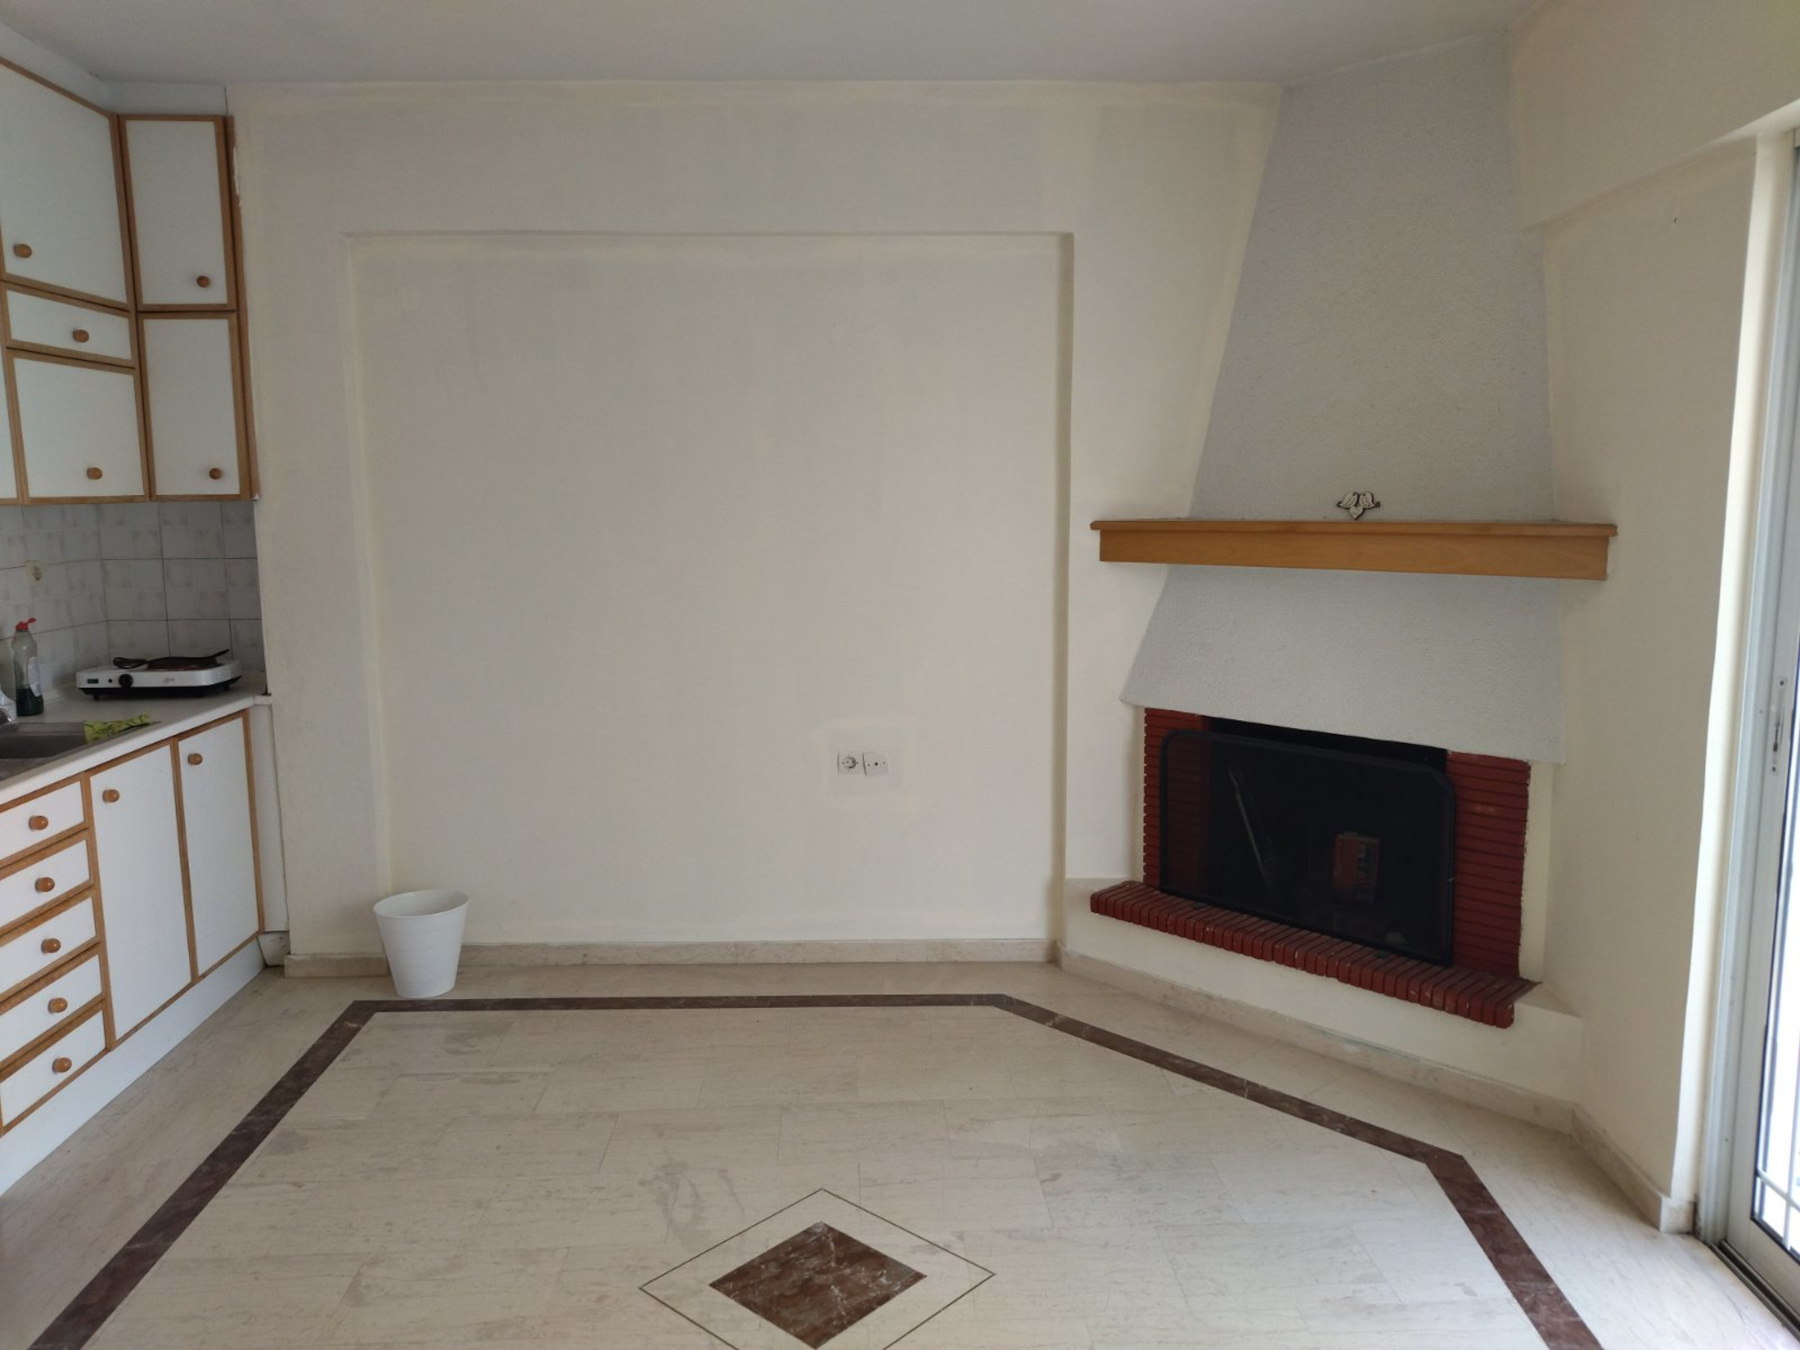 1 bedroom apartment for rent, 42 sq.m. 2nd floor in the area of Kaloutsiani in Ioannina